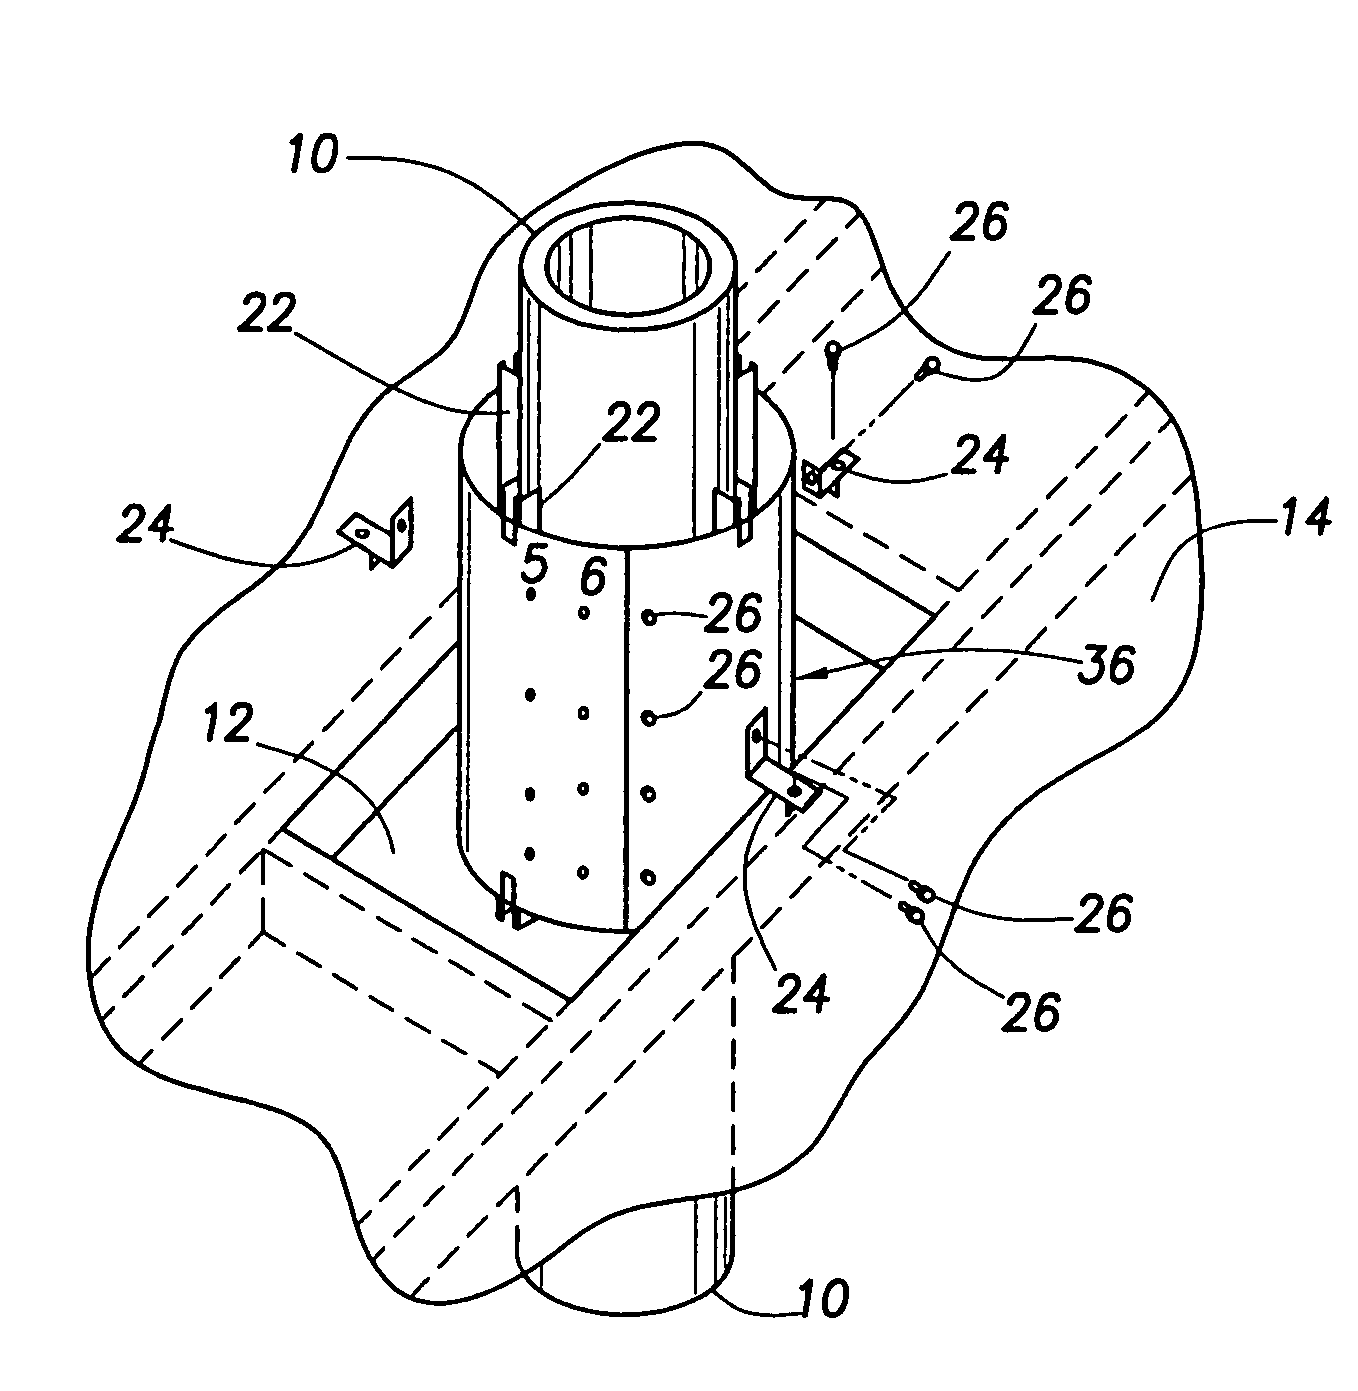 Rubber boot-based roof flashing apparatus